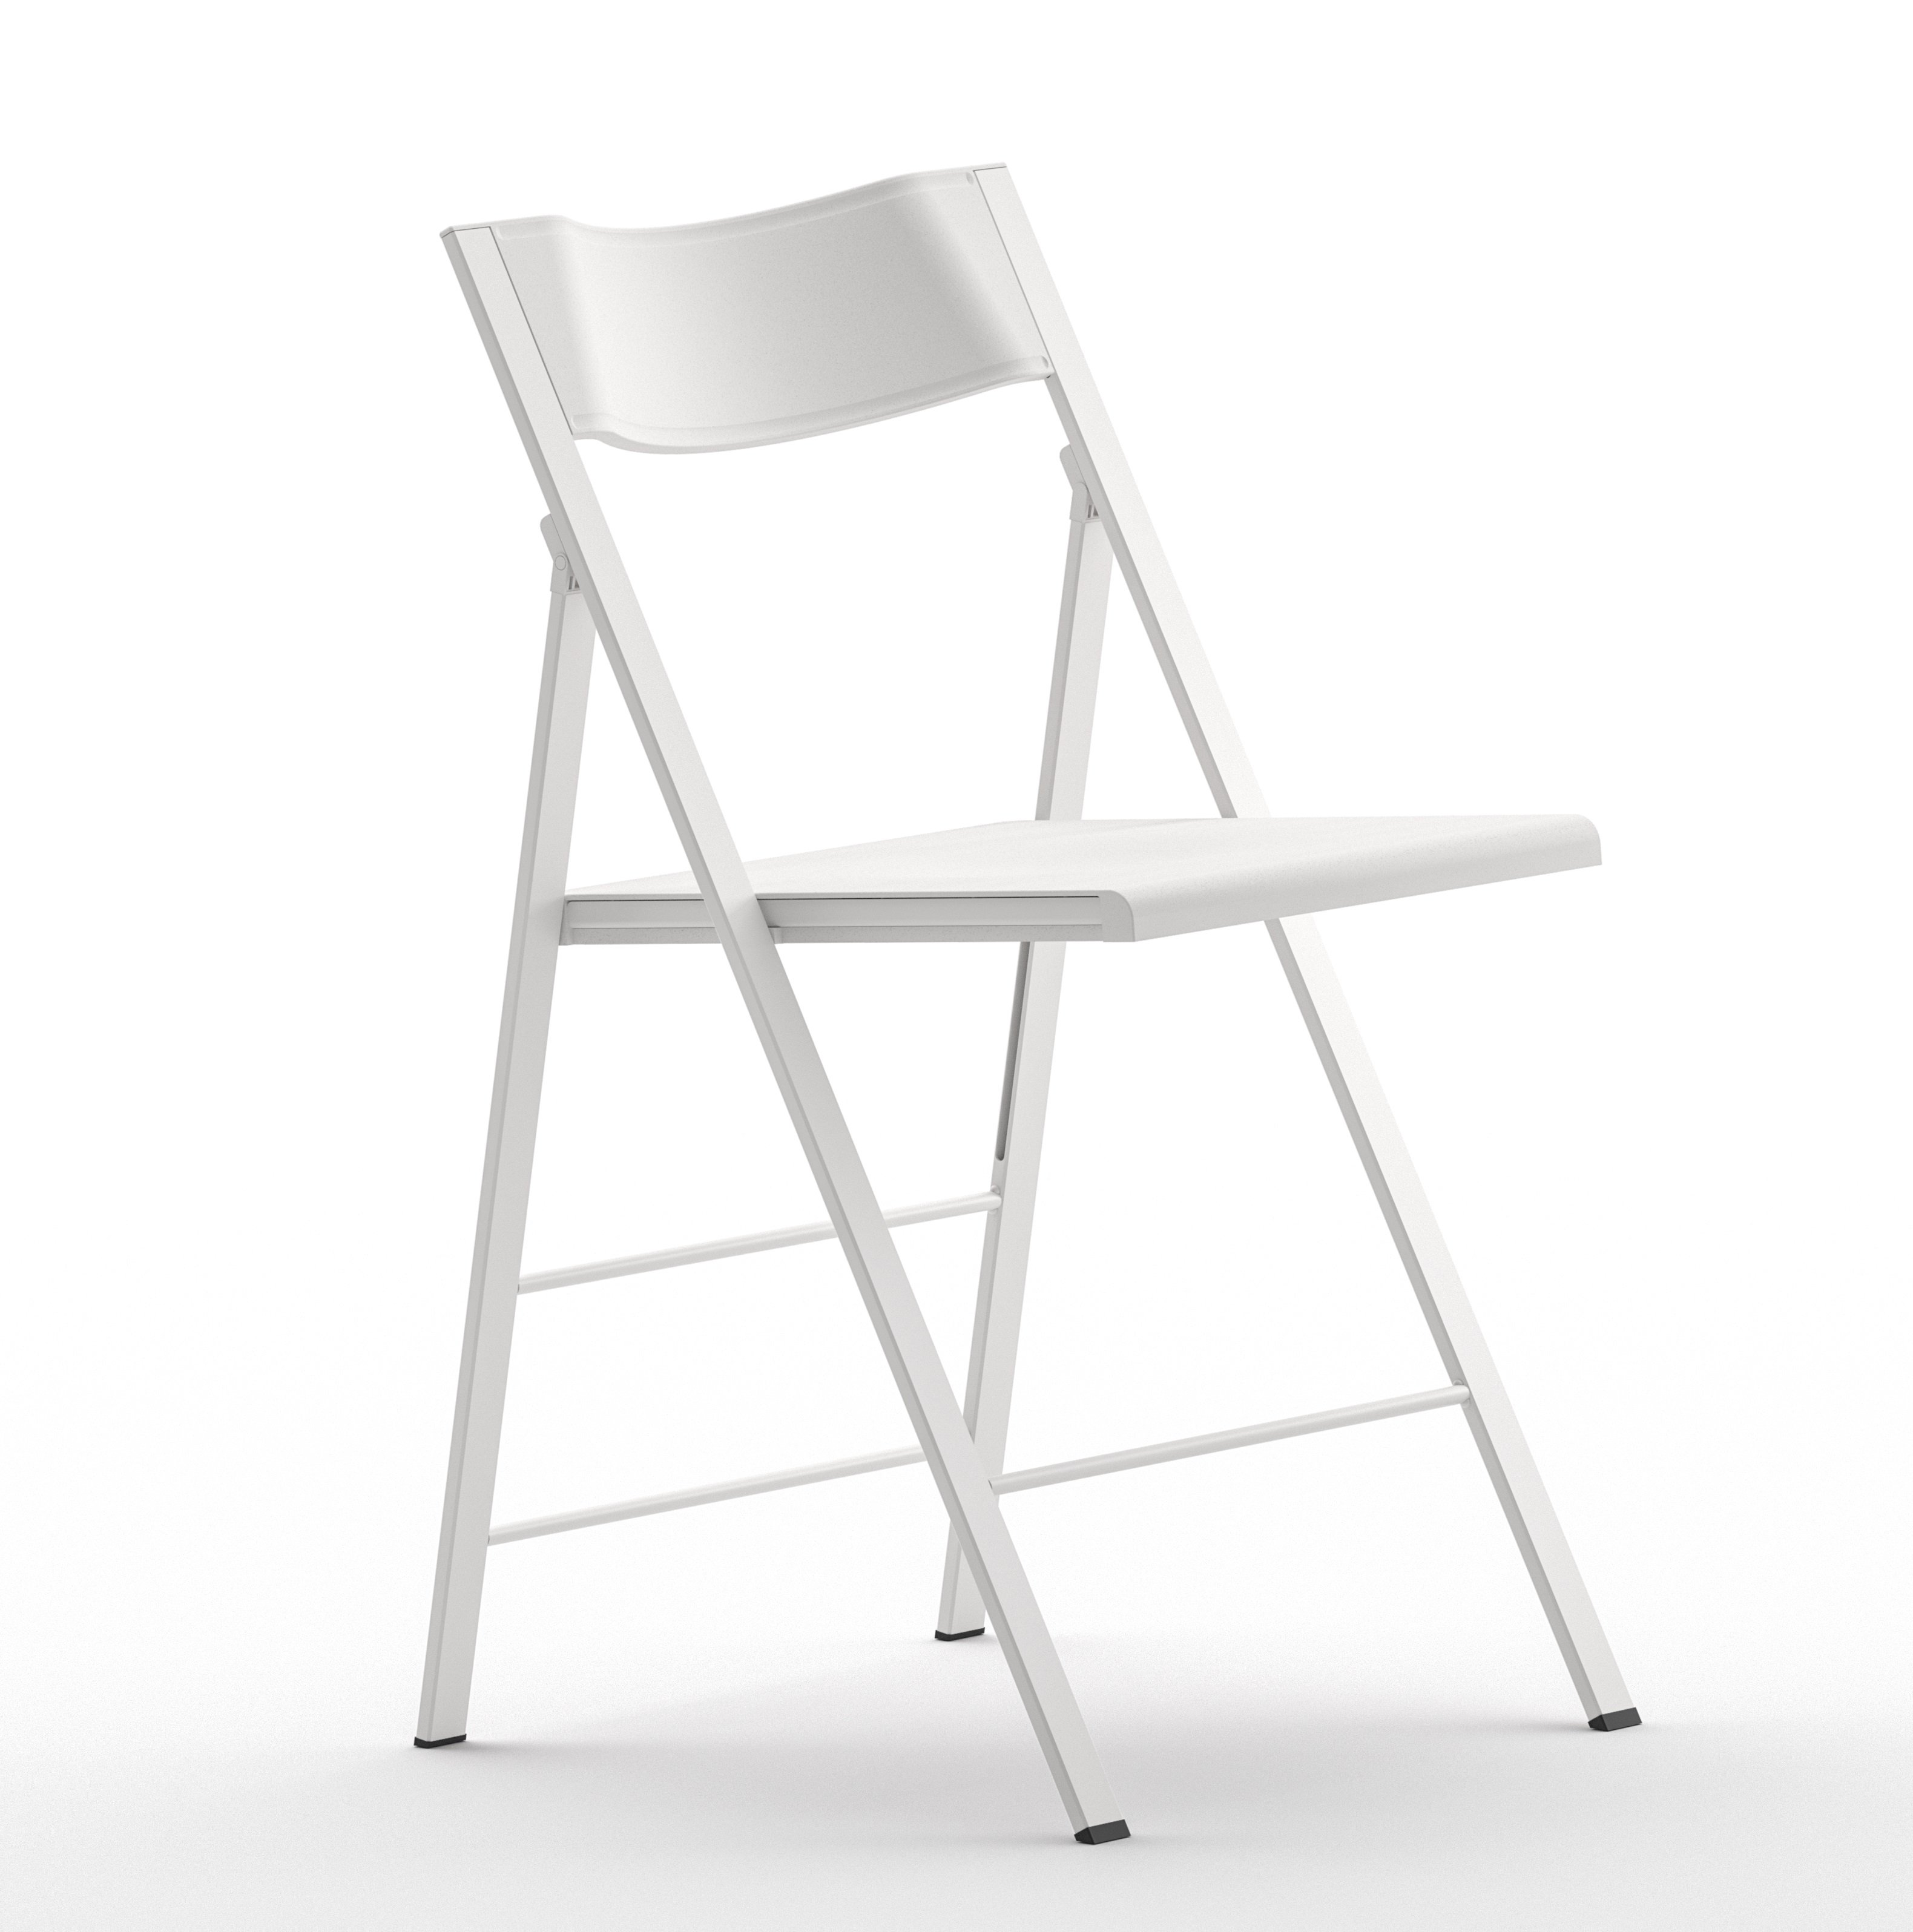 Pocket Plastic Chair  from Arrmet, designed by Francesca Petricich